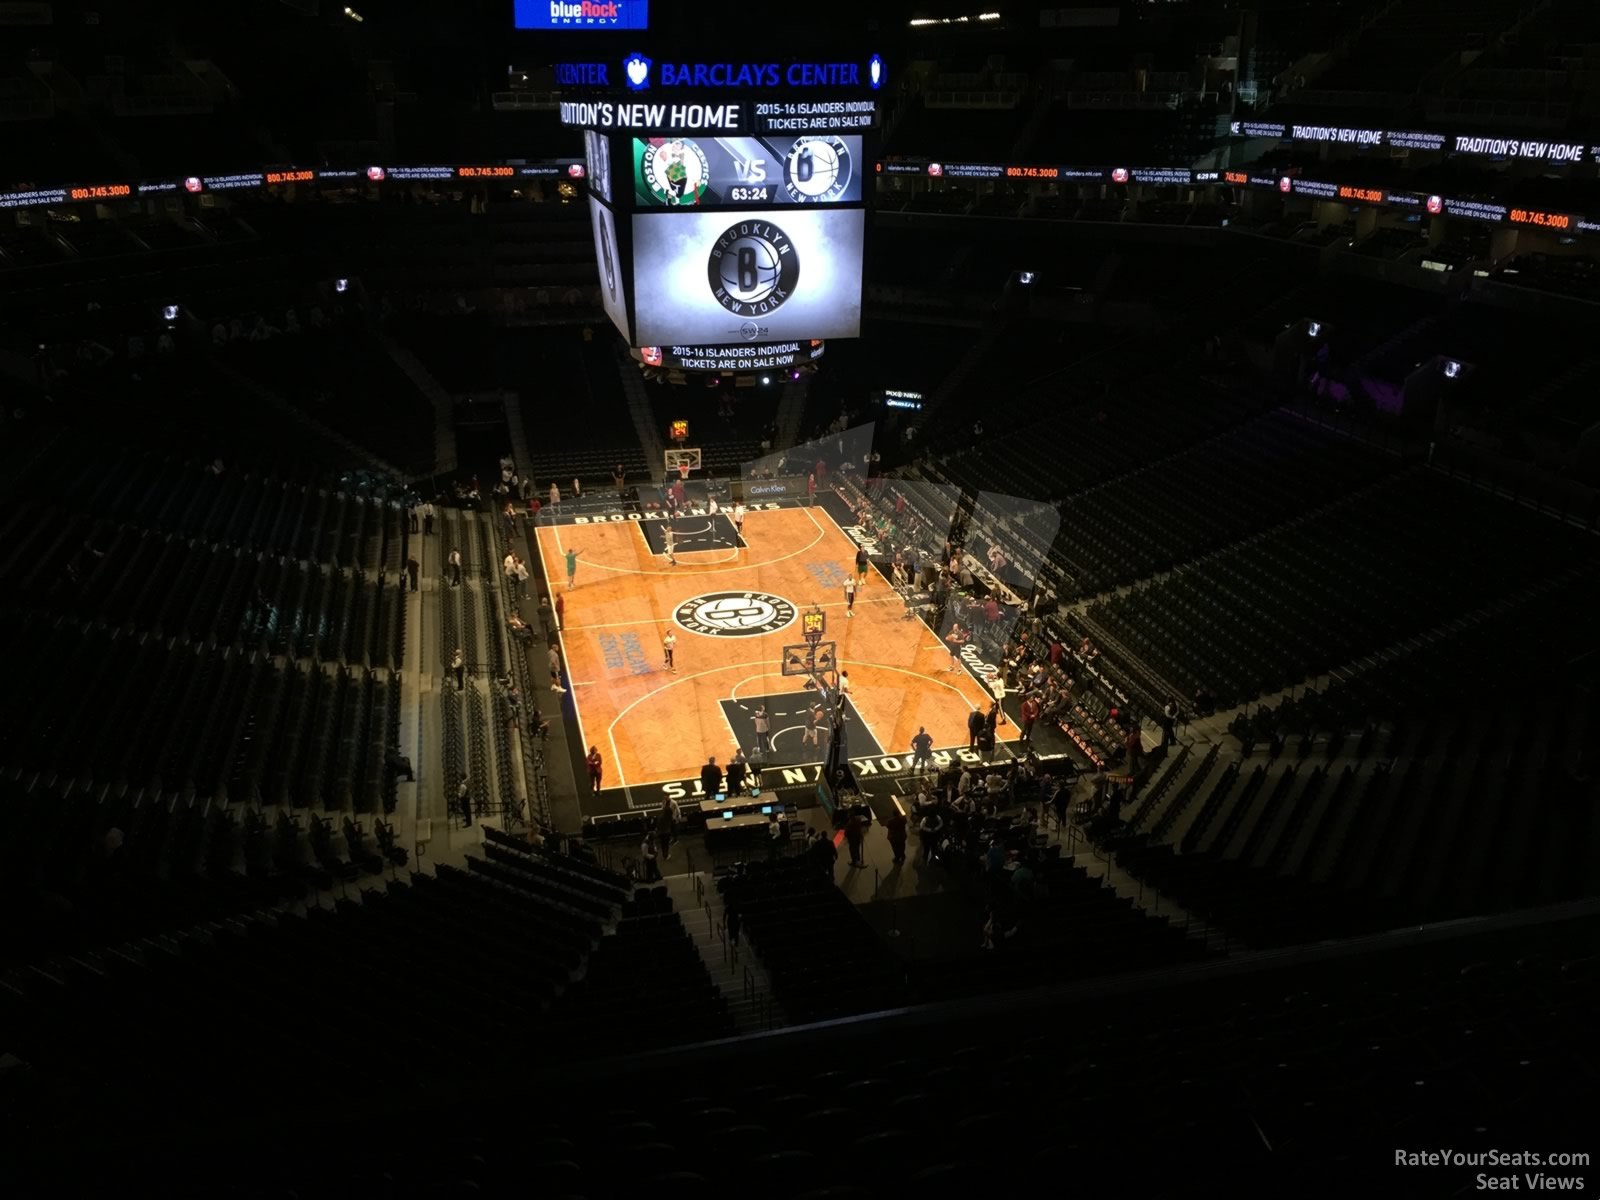 section 217, row 10 seat view  for basketball - barclays center